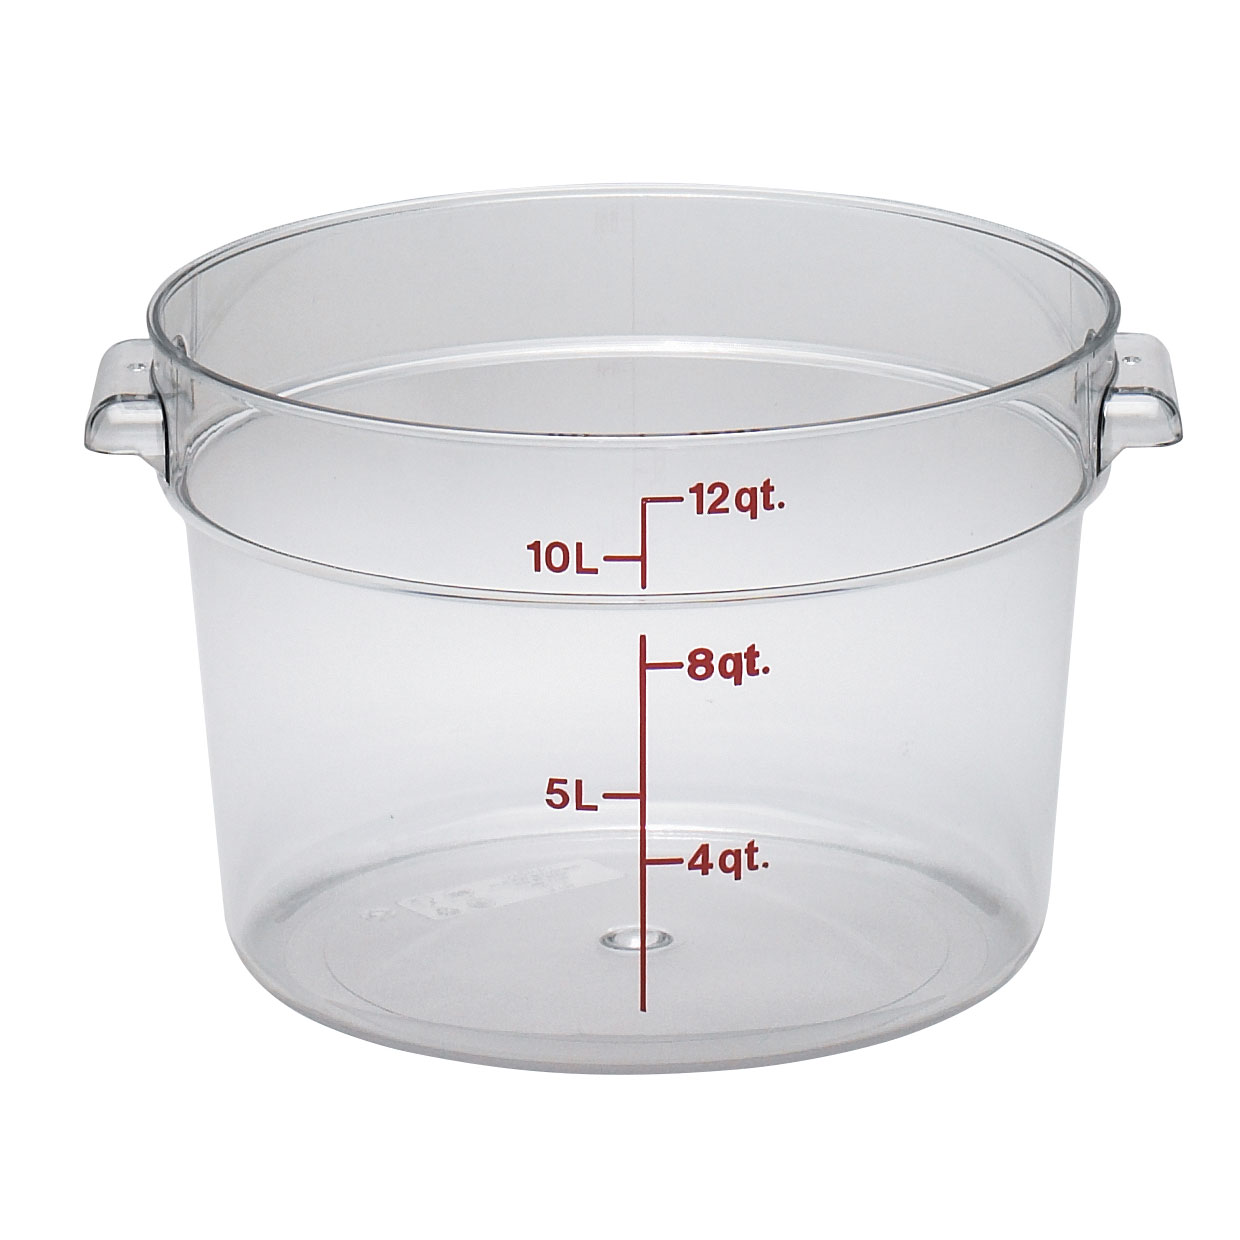 12 QT CLEAR ROUND FOOD
STORAGE CONTAINER, EACH 4/22